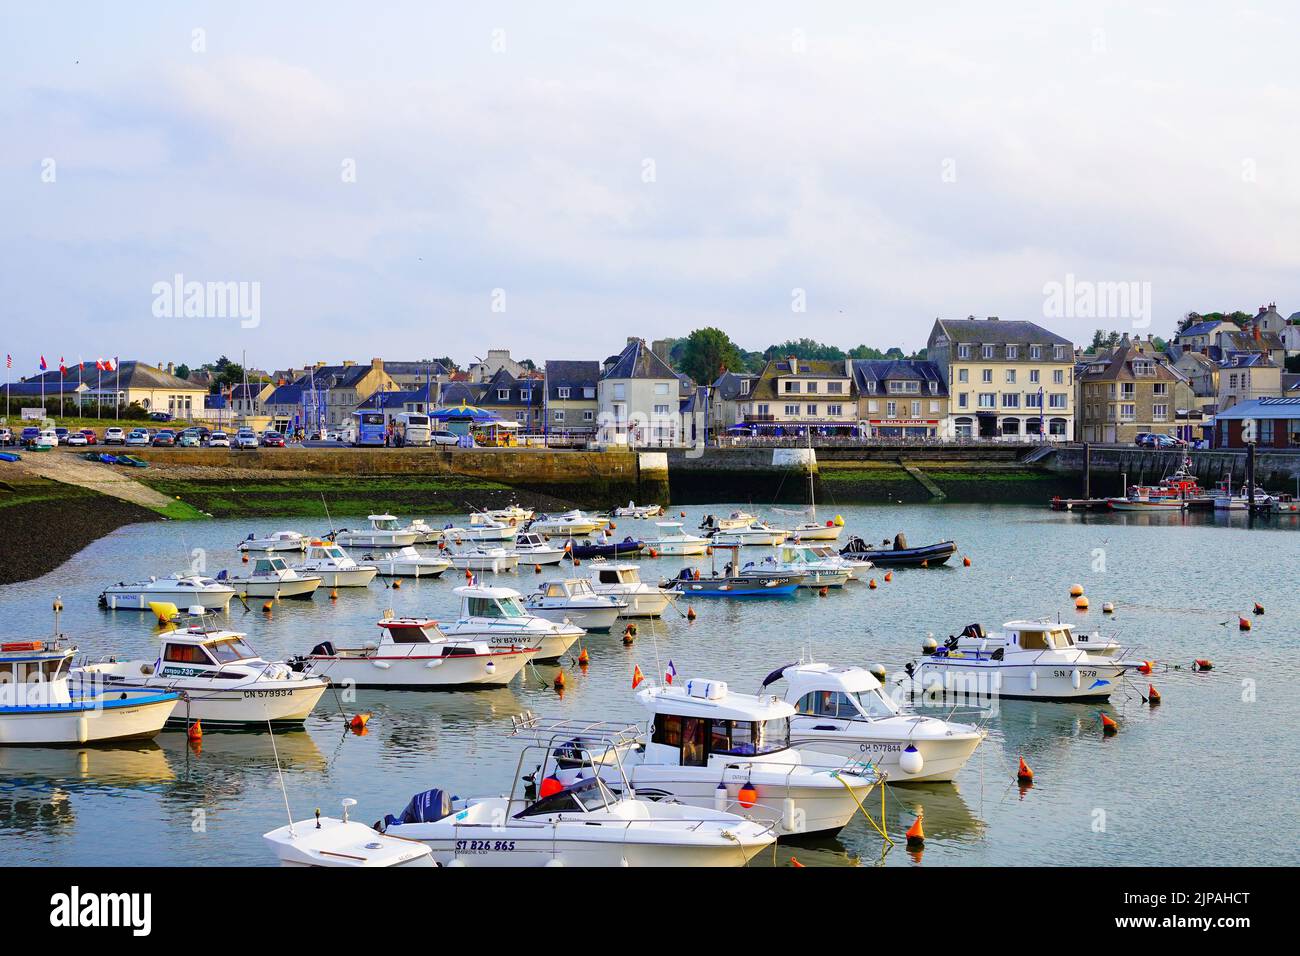 Summer sunset at Port en Bessin, a port town in Normandy, France Stock Photo